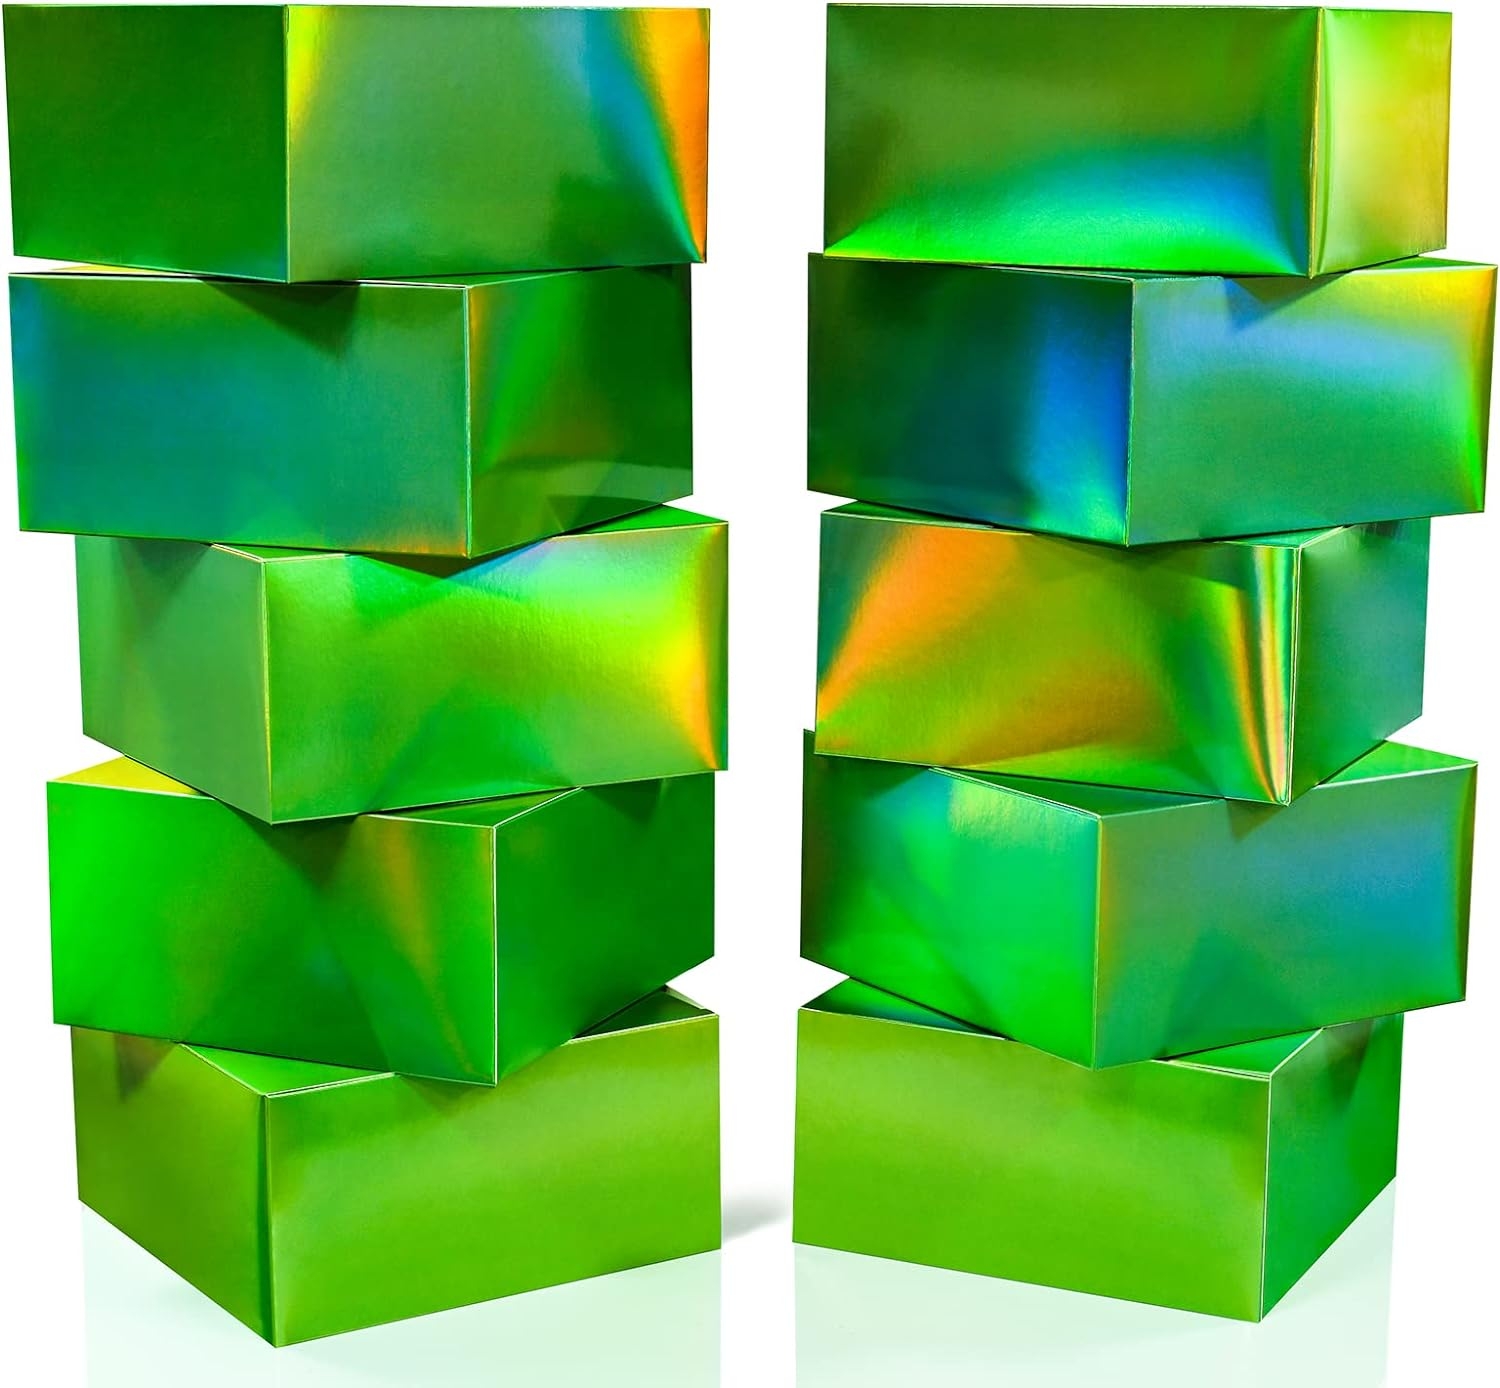 SHANSVYE Gift Boxes,Gift Boxes with Lids,10 pcs 8x8x4in Gift Boxes for Presents,Holographic Green Gradient Boxes,Bridesmaid Proposal Boxes,Decorative Gift Boxes Bulk,Boxes for Gifts,Birthday, Christmas, Wedding, Party Favor (10, Gradient Green)